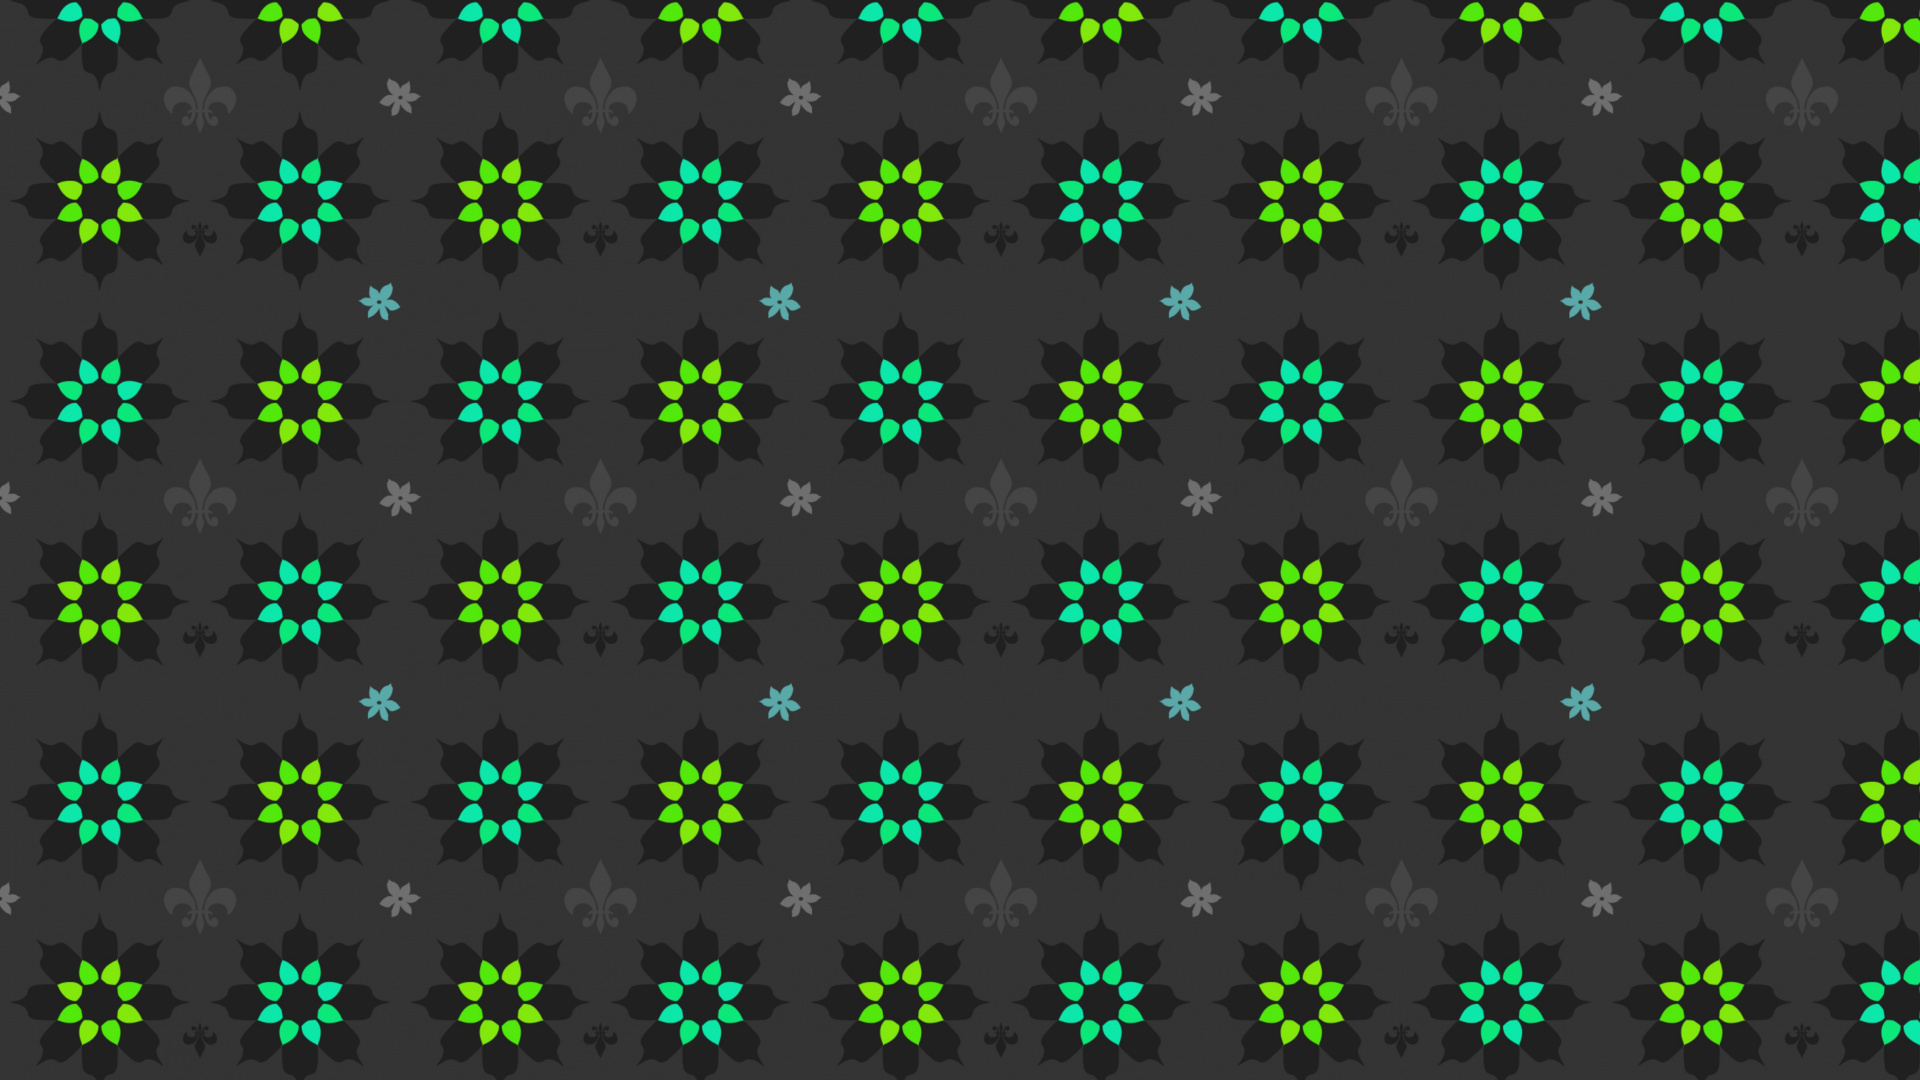 Black and White Star Print Textile. Wallpaper in 1920x1080 Resolution